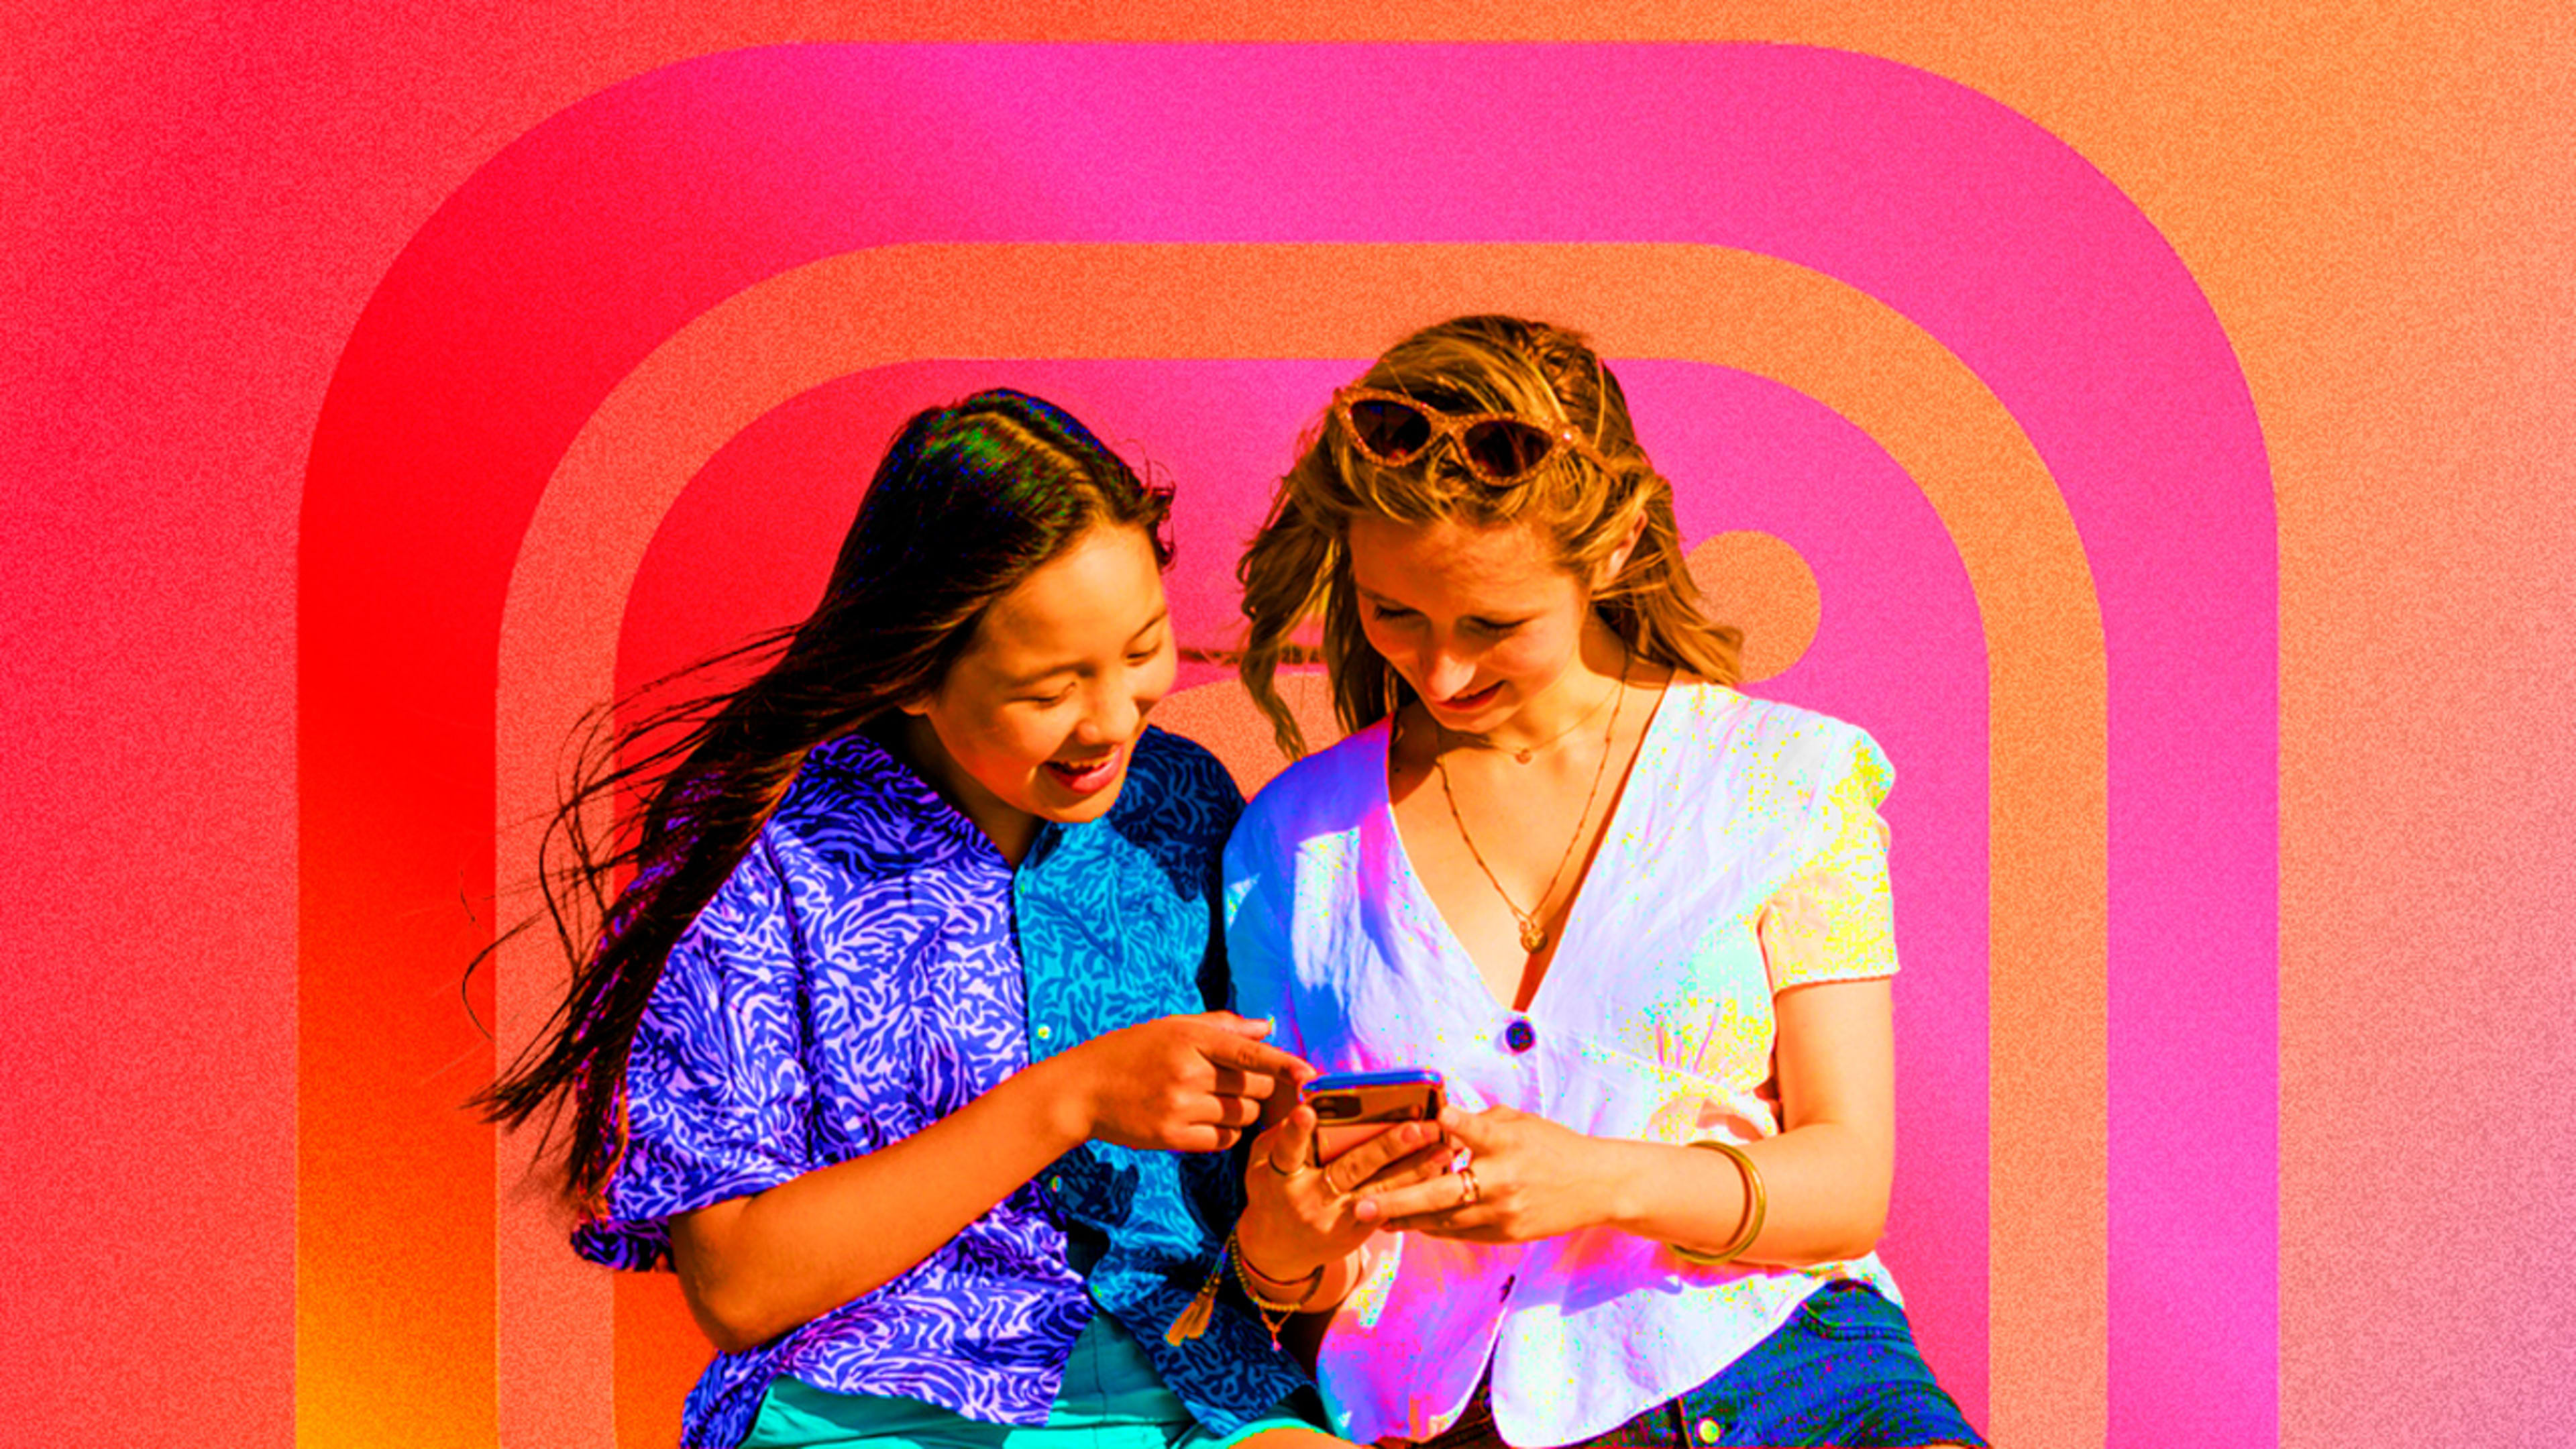 A new study suggests teenagers who use Instagram are happier than we think